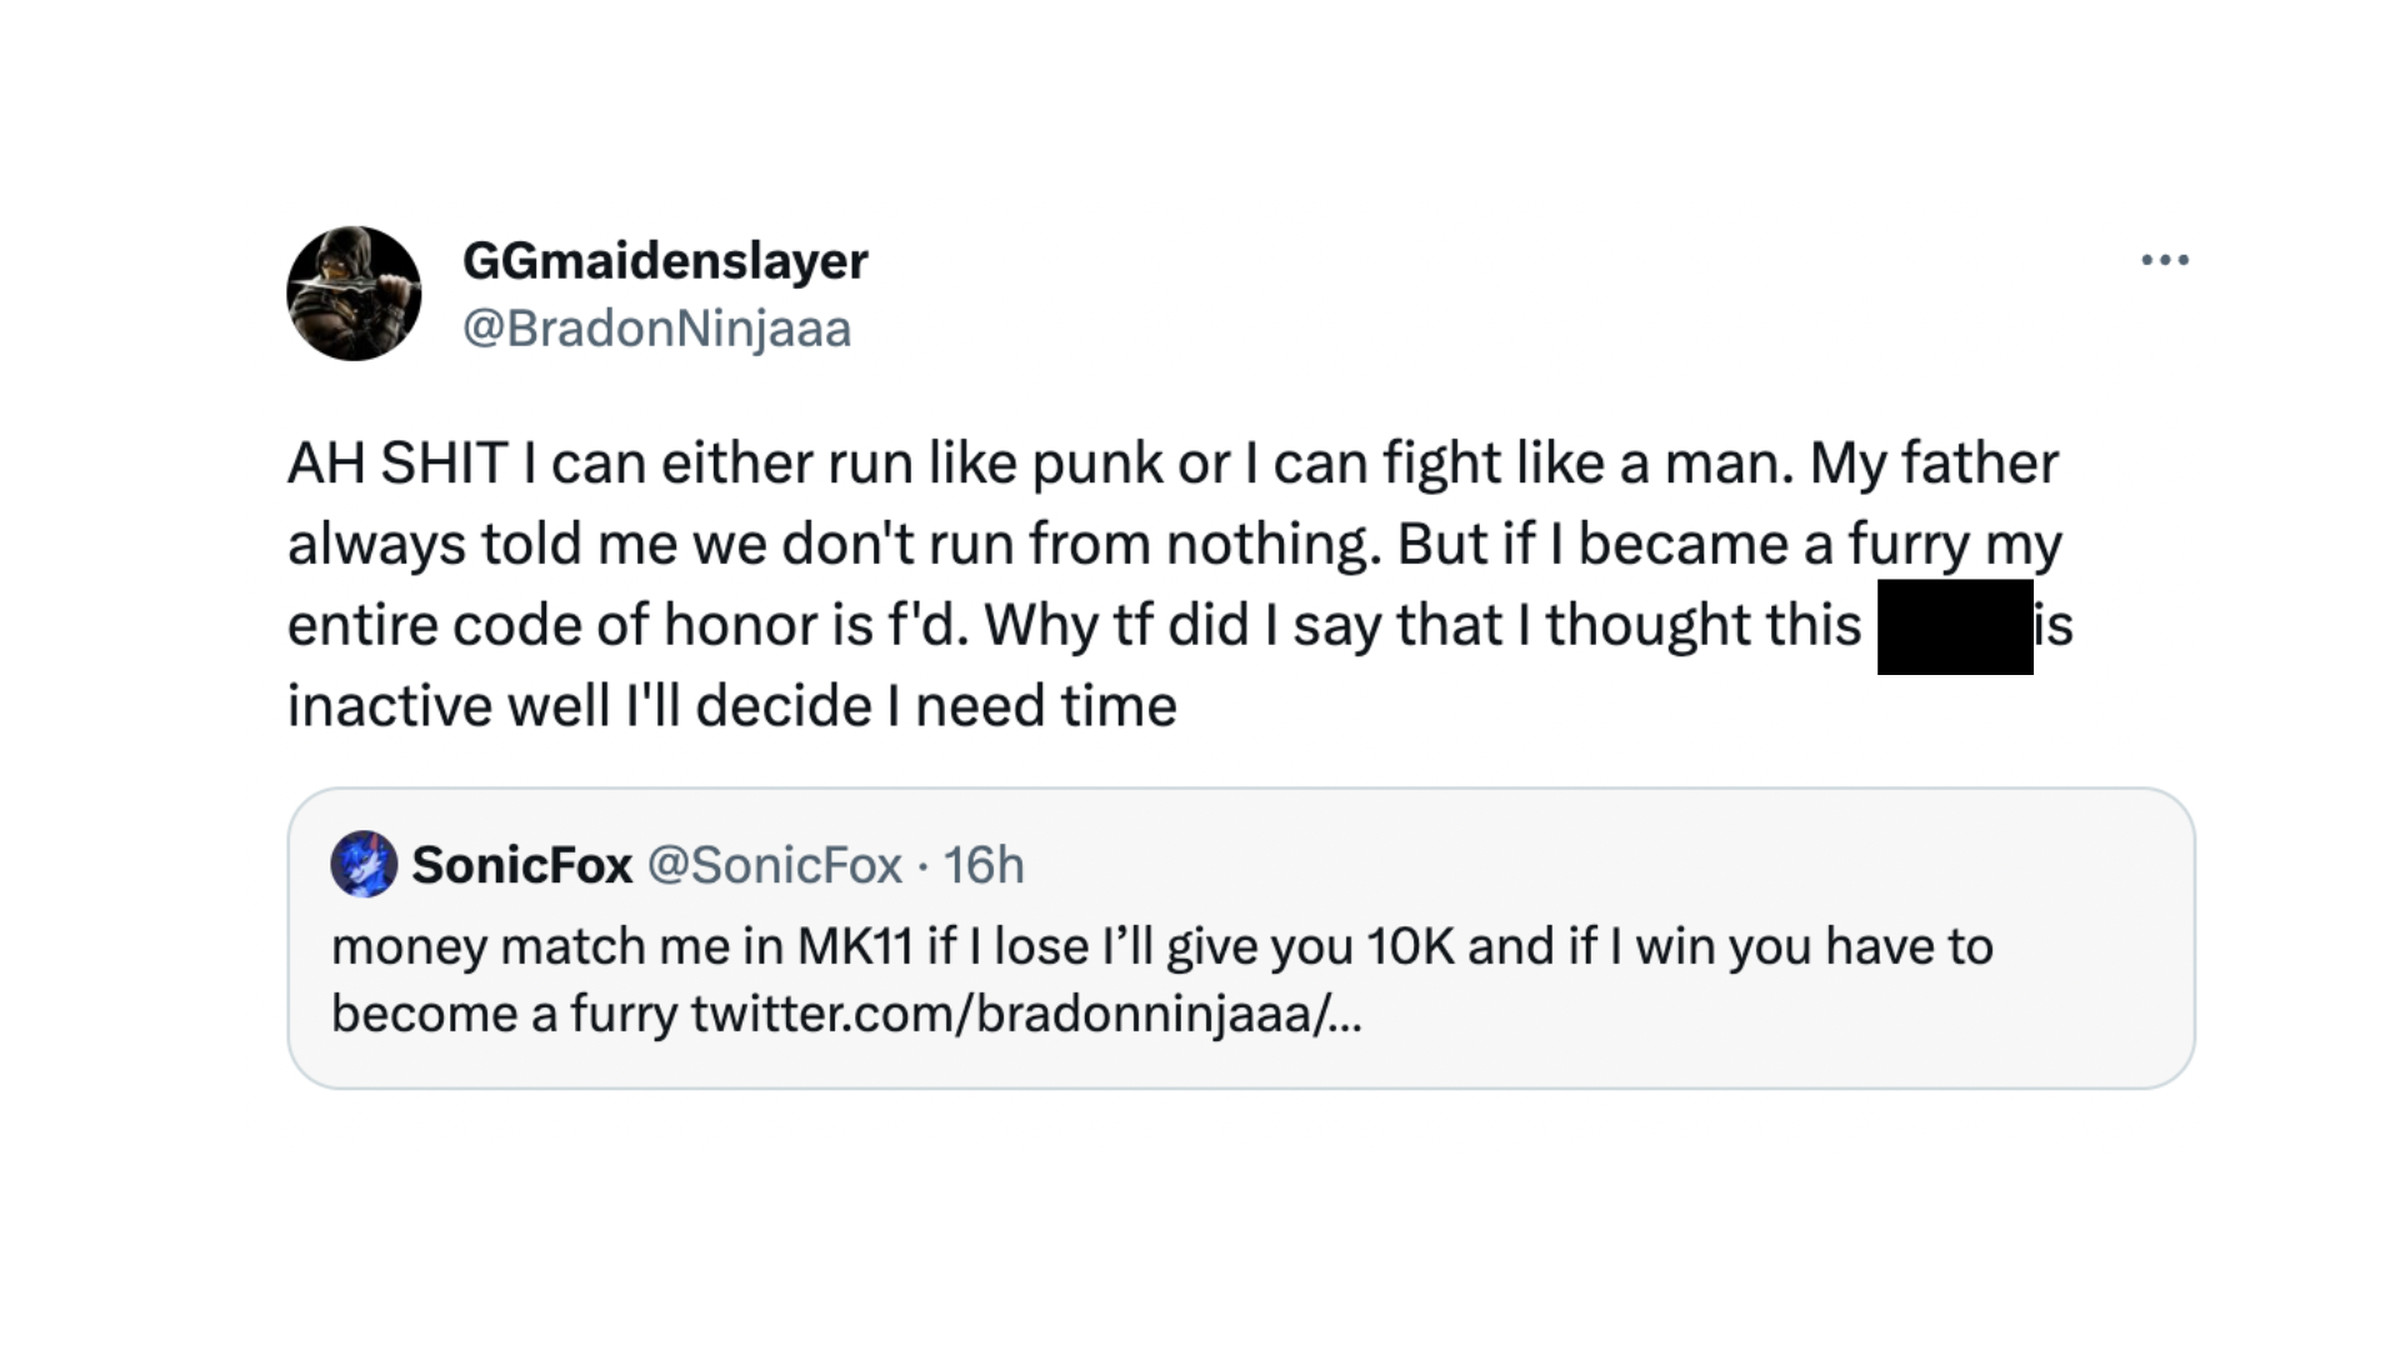 Sceenshot of a quote retweet from @BrandonNinjaa reading: AH SHIT I can either run like punk or I can fight like a man. My father always told me we don’t run from nothing. But if I became a furry my entire code of honor is f’d. Why tf did I say that I thought this (N-word) is inactive well I’ll decide I need time.